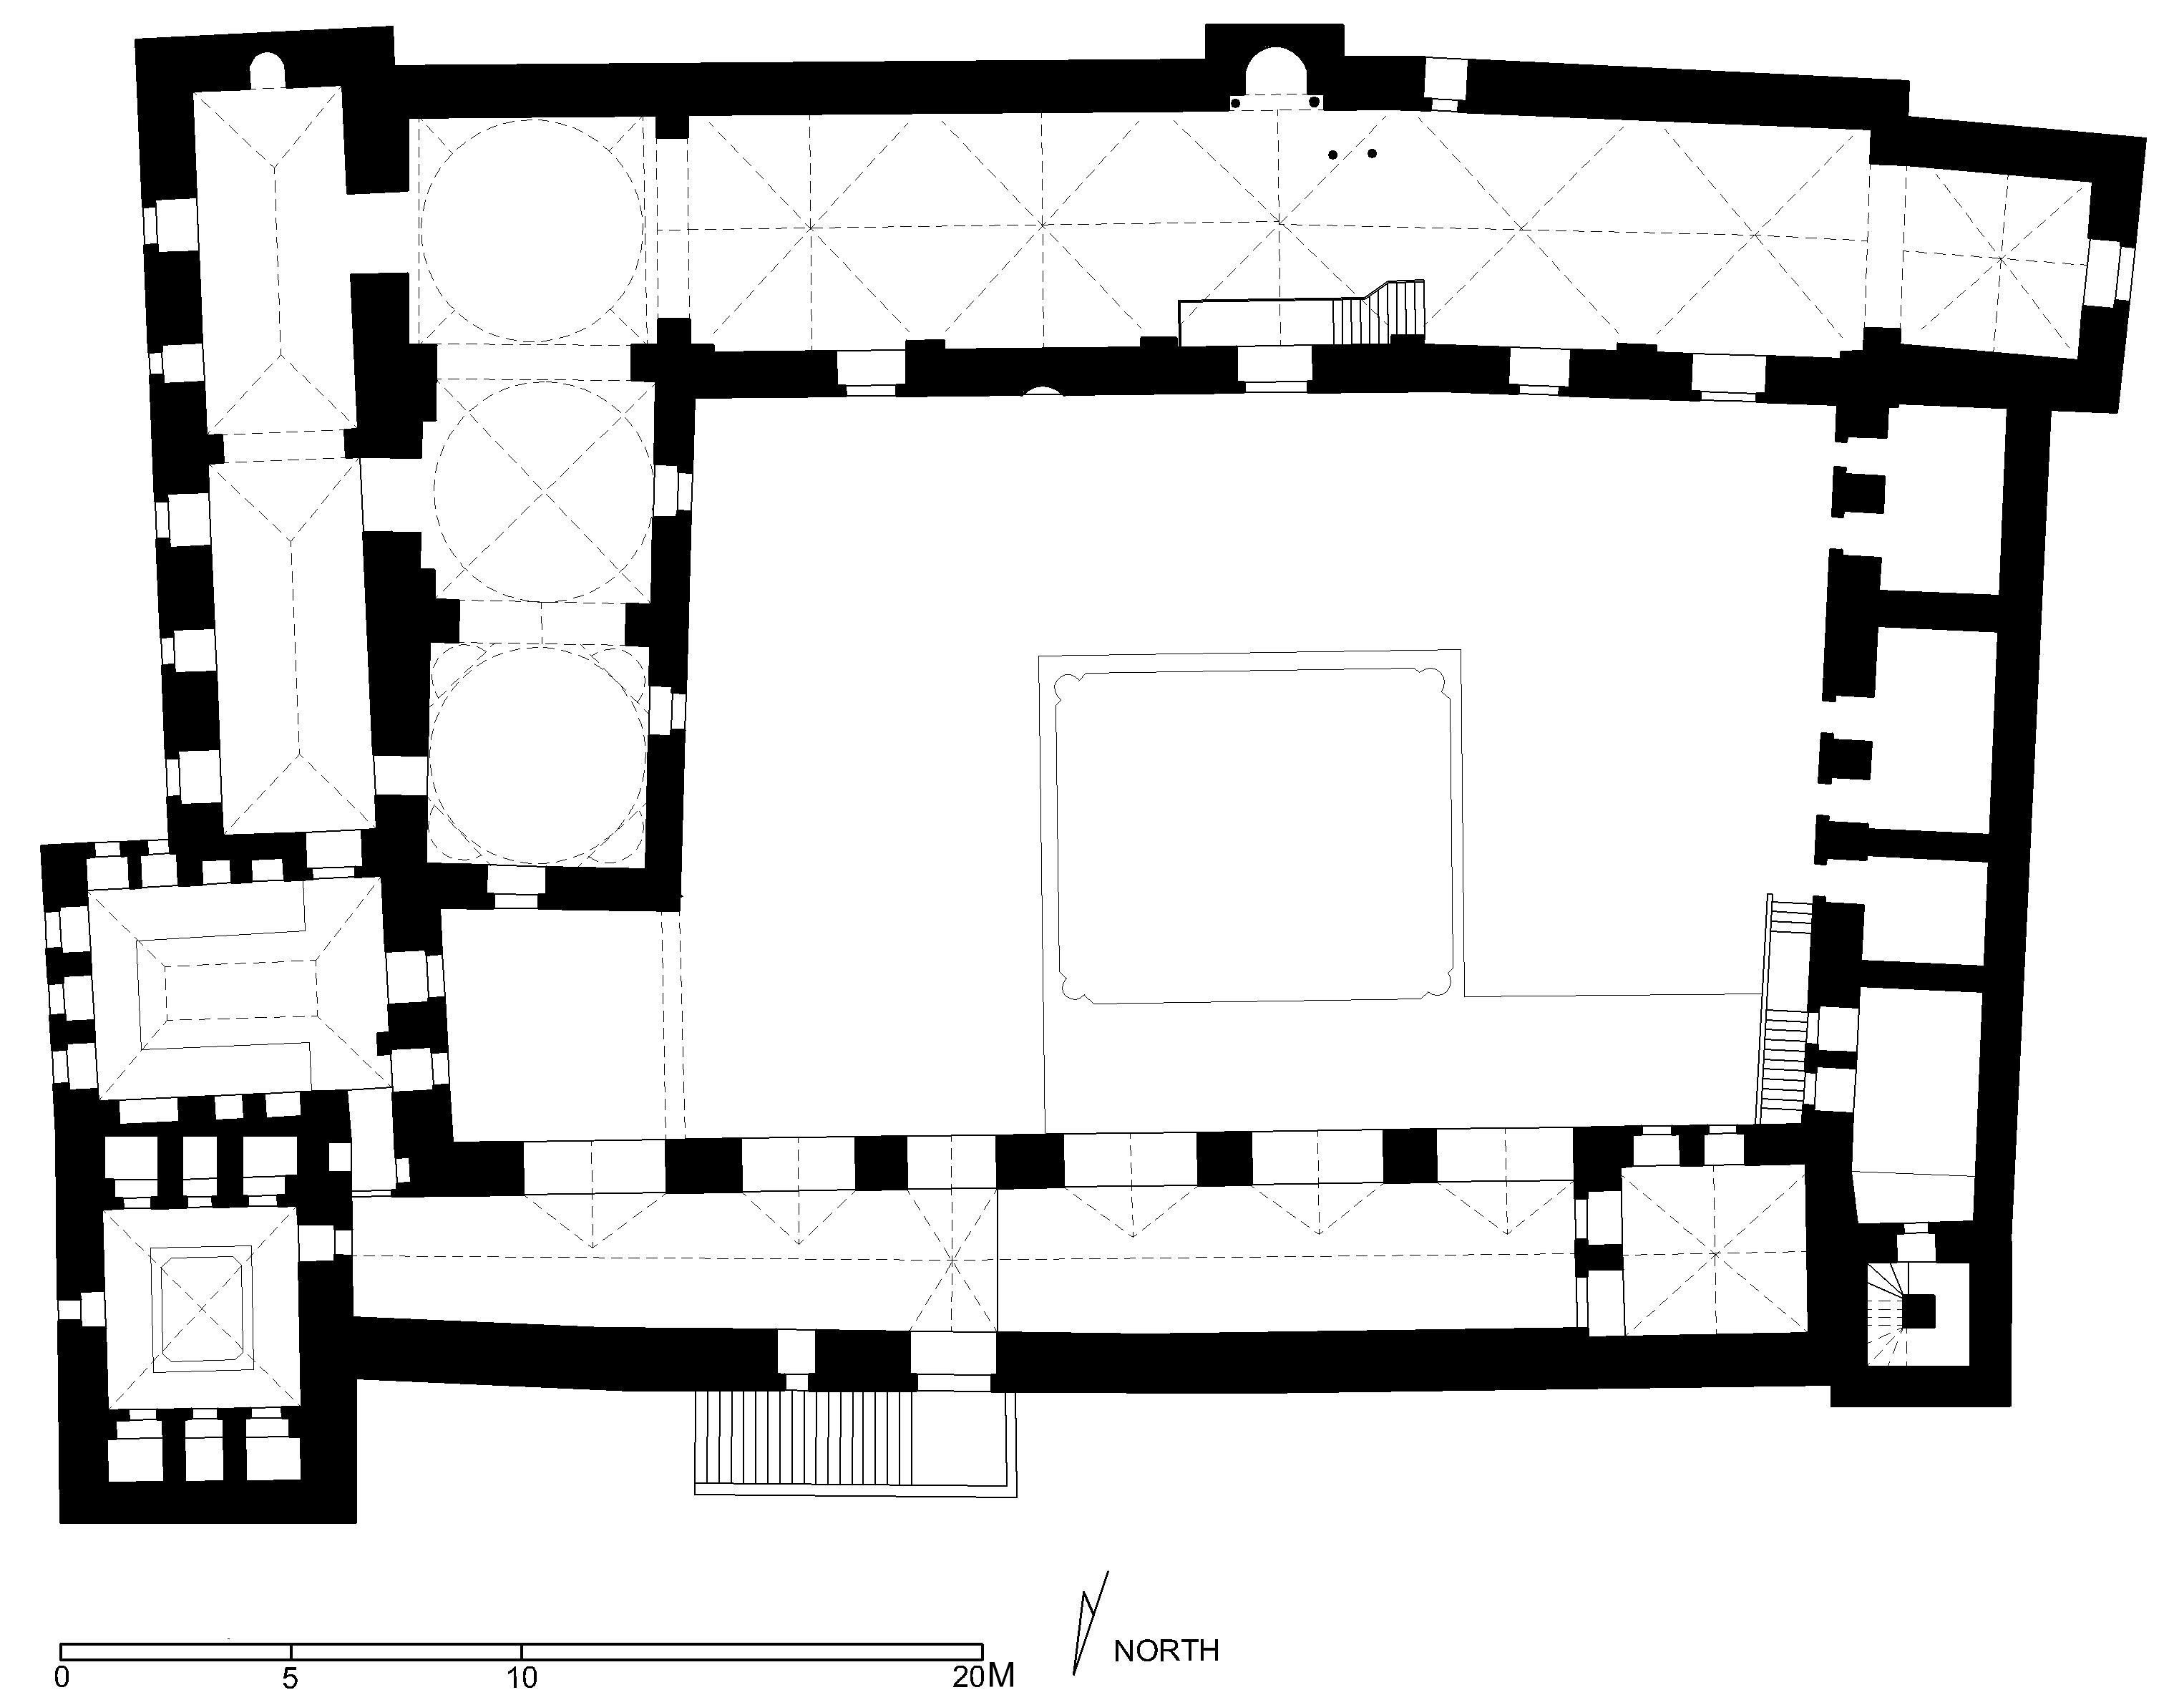 Jami' Nur al-Din (Hama) - Floor plan of mosque (after Meinecke) in AutoCAD 2000 format. Click the download button to download a zipped file containing the .dwg file.